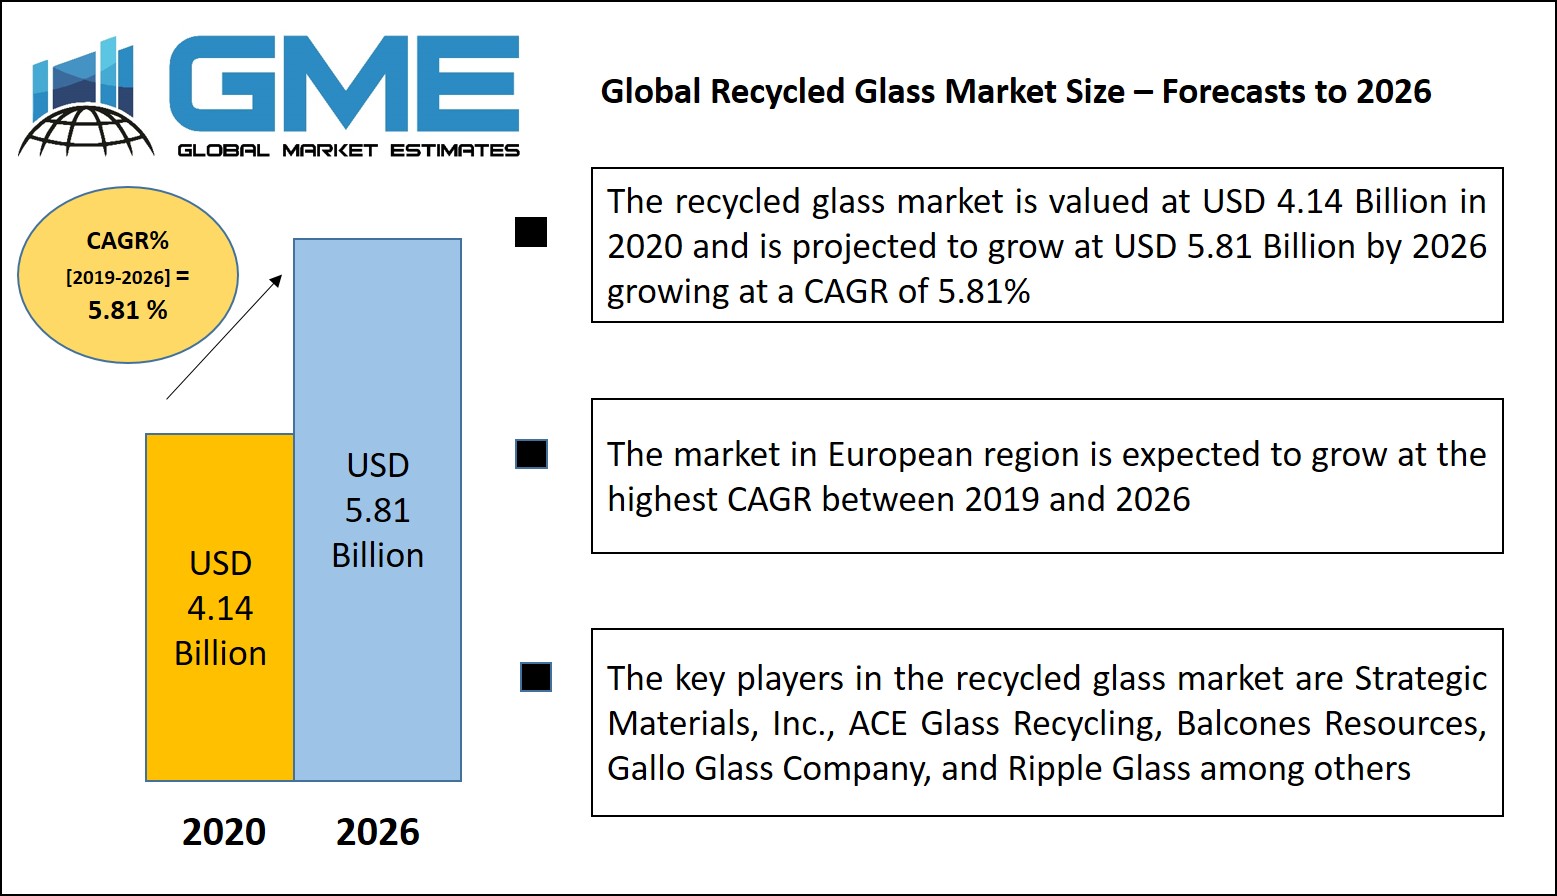 Global Recycled Glass Market Size – Forecasts to 2026